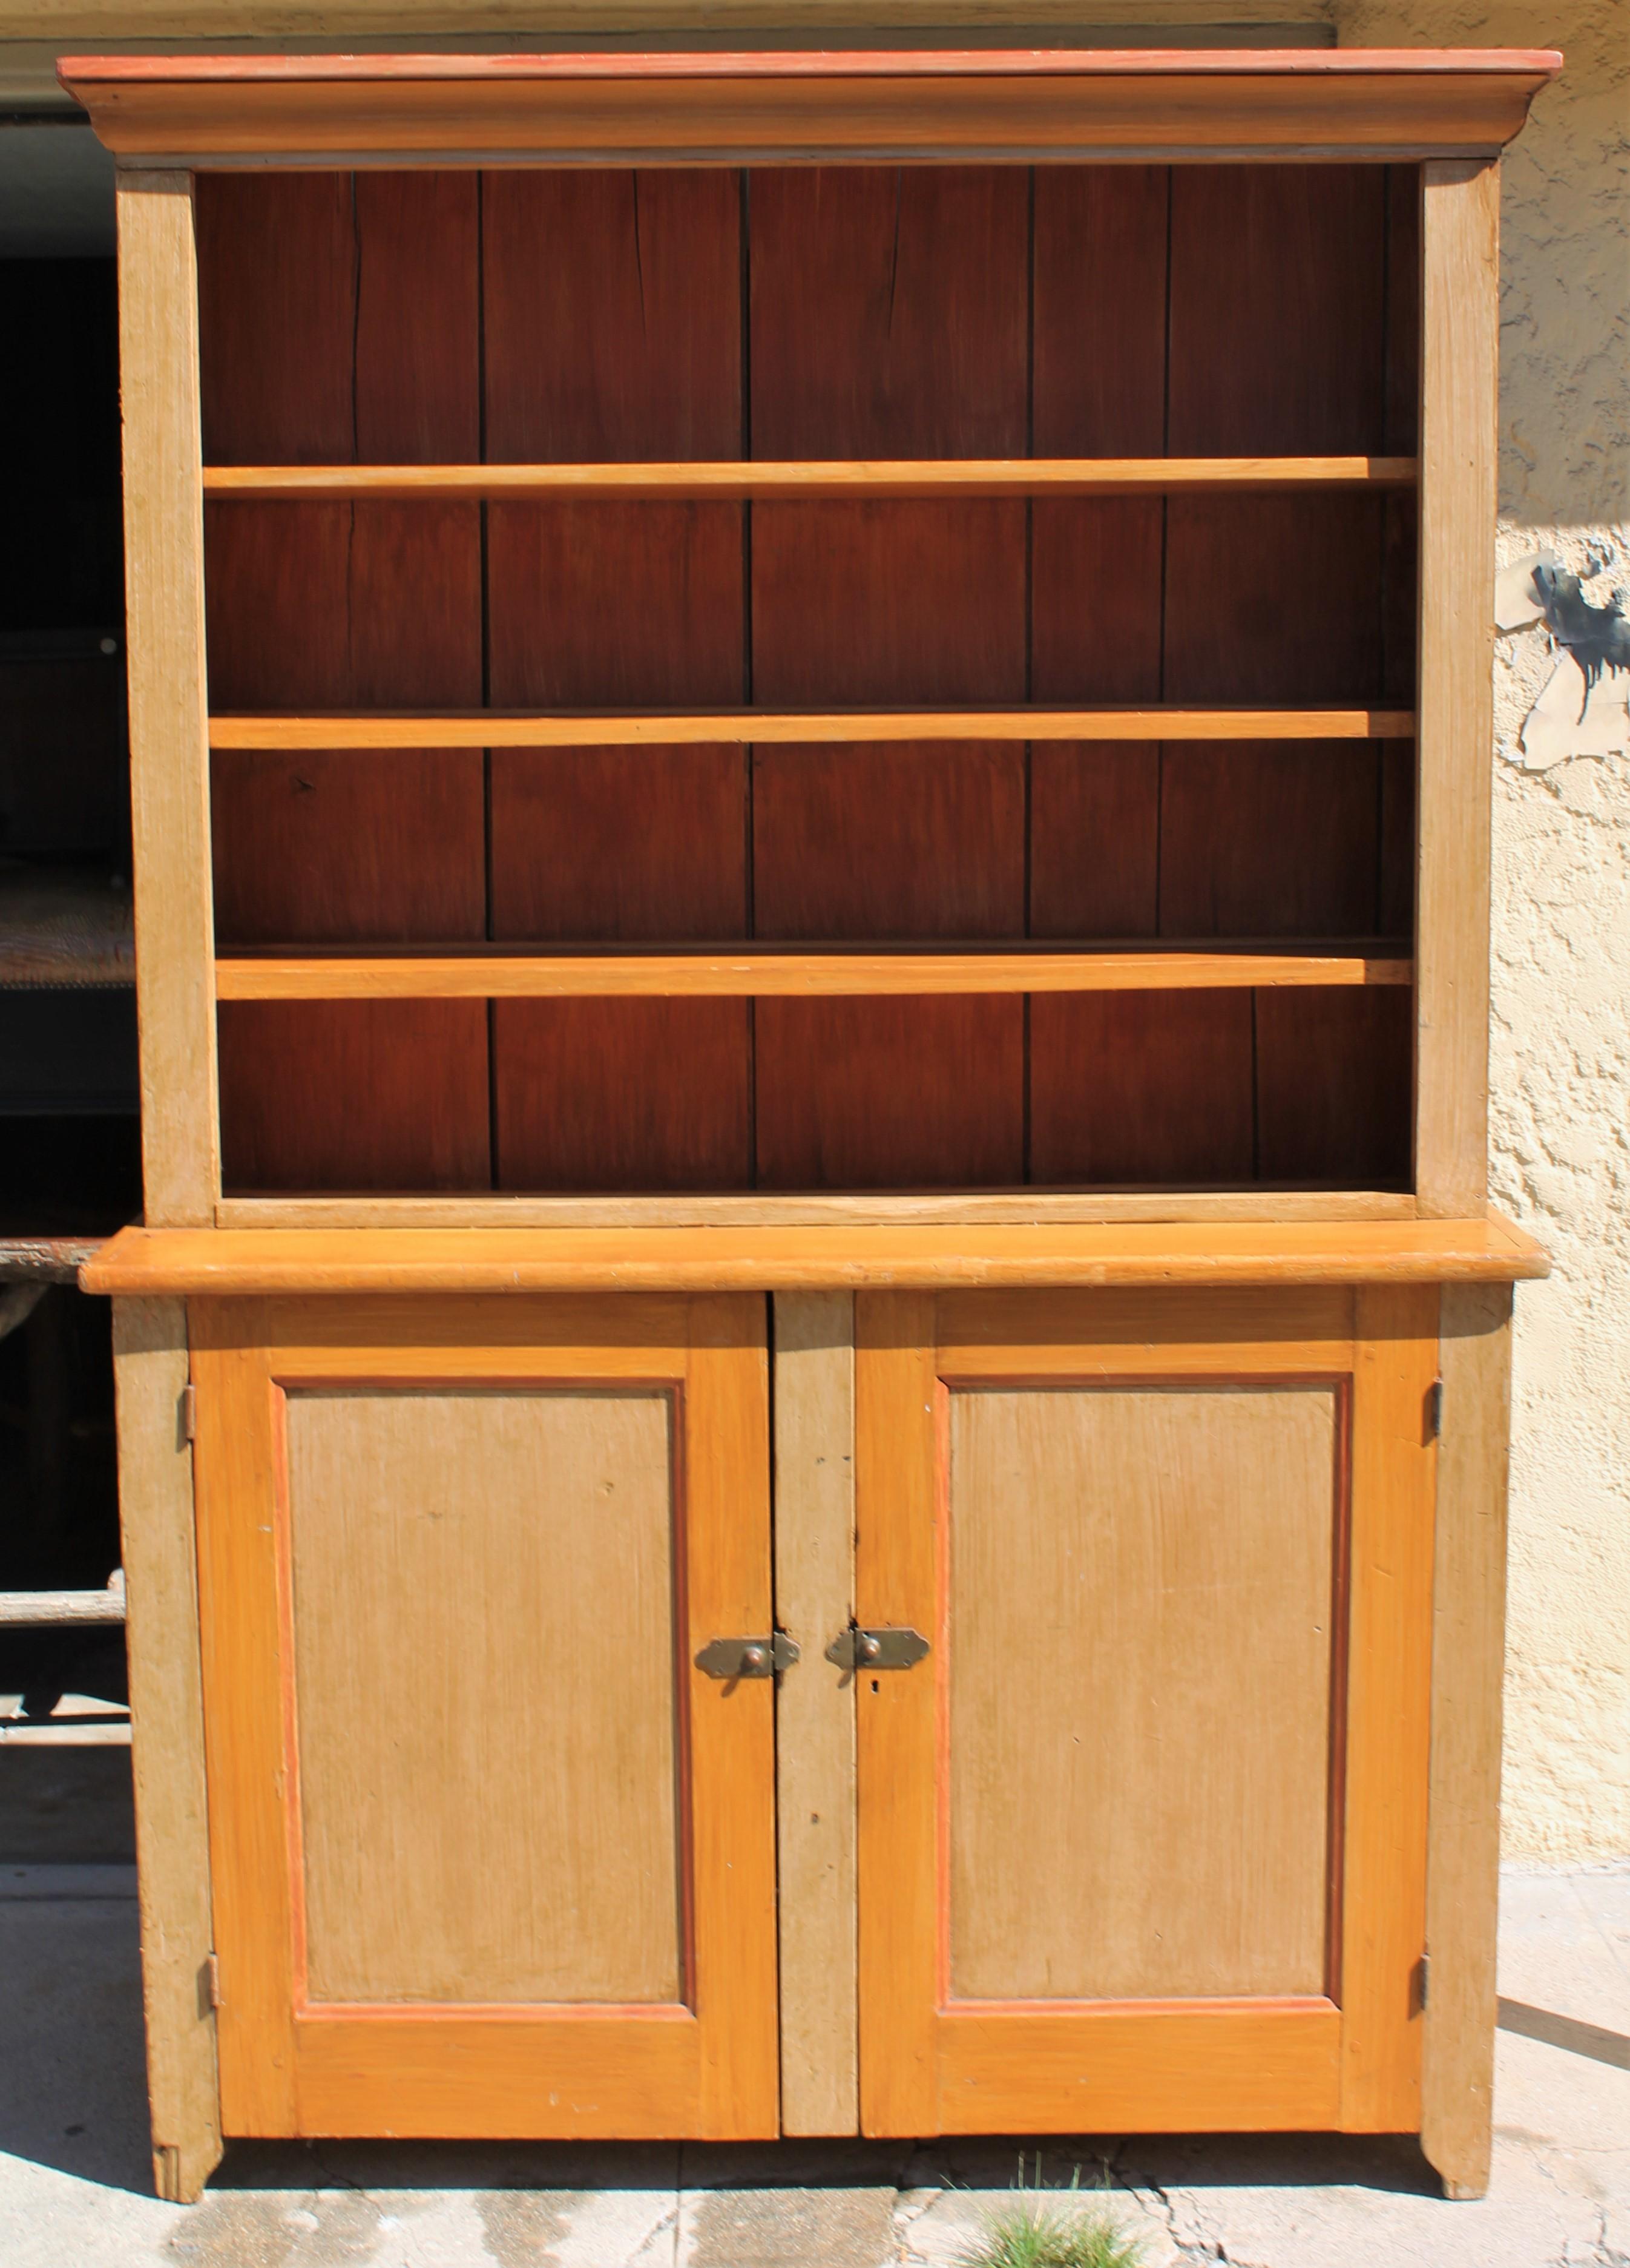 This fine original painted open pewter cupboard is in fine condition with lots of space for your collection of antique dishes or pewter collection. The cream or tan finish with bittersweet trim doors has the original hardware as well. The backboards